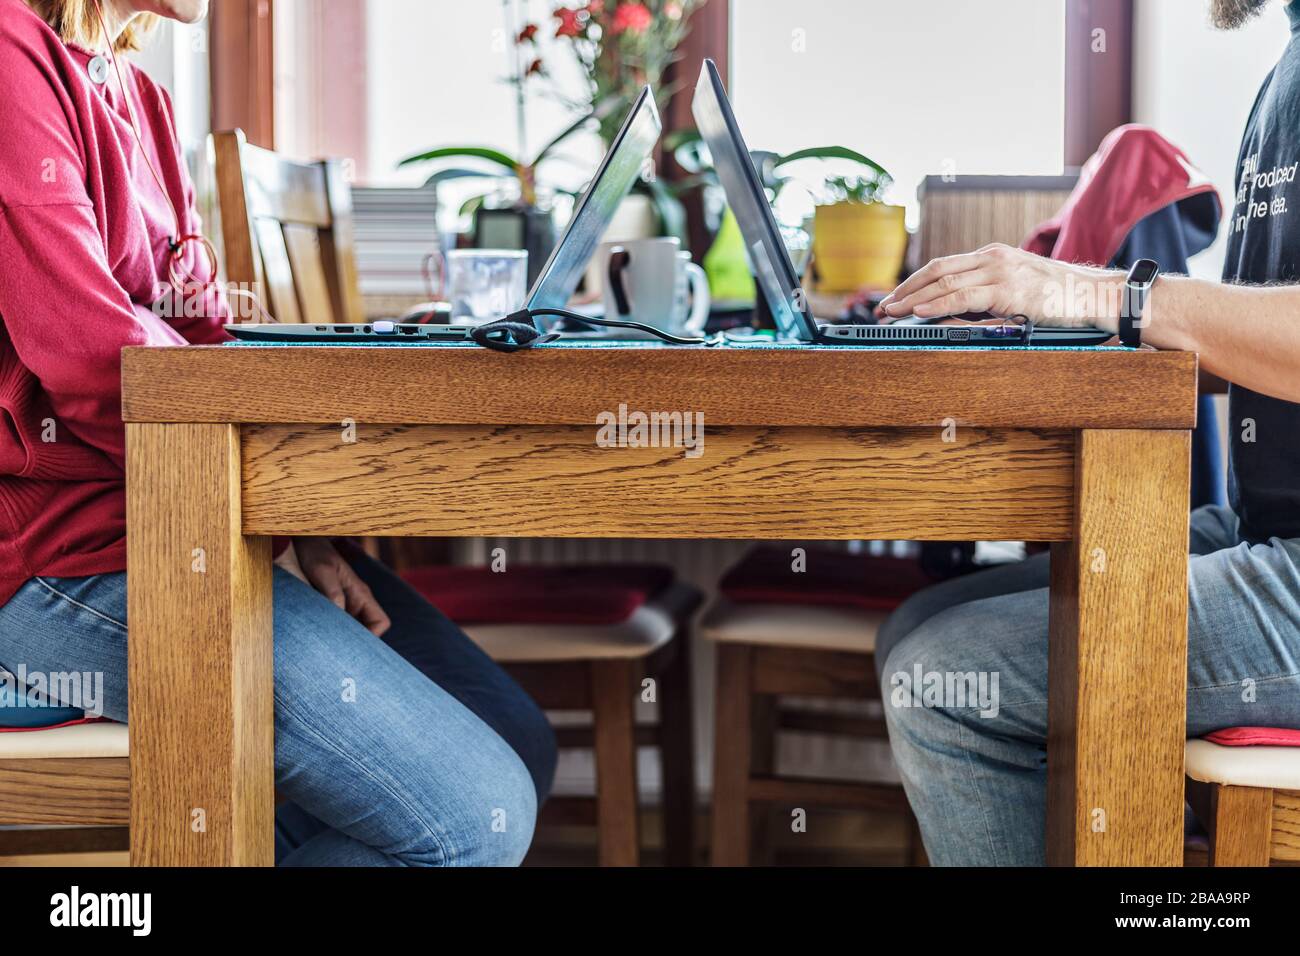 Couple working from home during coronavirus pandemic. Candid image of man and woman sitting at one table with their laptops and other stuff nearby. Stock Photo